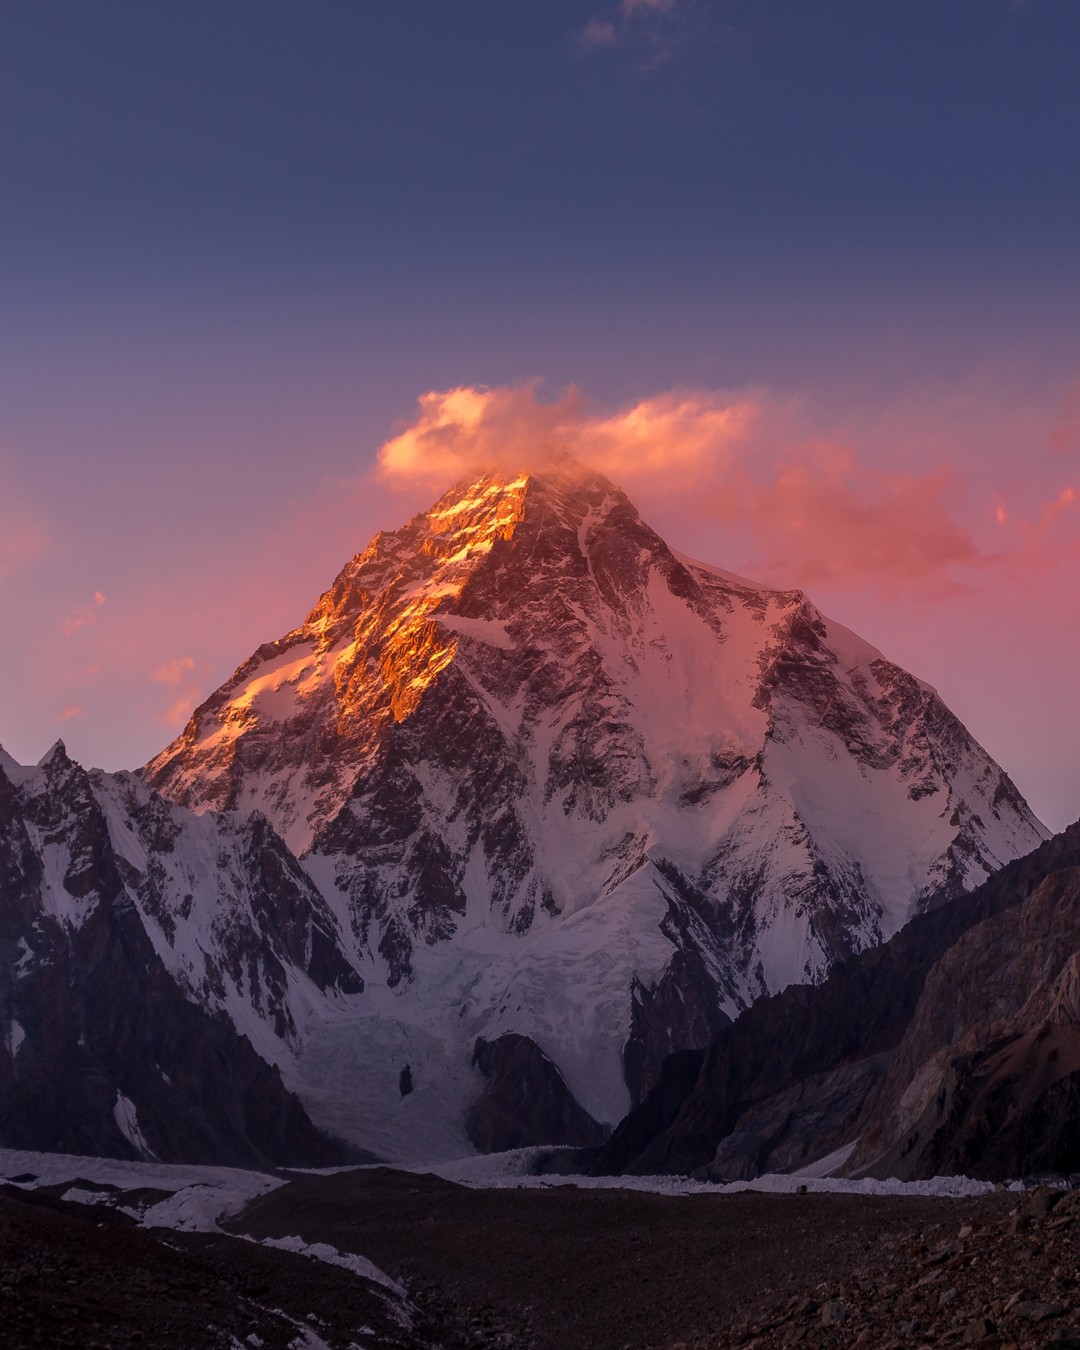 Sunsets in the Karakoam are magical.⁣
⁣
Legendary mountaineer Reinhold Messner described K2 as “the mountain of mountains” after completing the fourth ascent of the peak in 1979. “It is the most beautiful of all the high peaks,” he continued. “An artist has made this mountain.” ⁣
⁣
I can’t think of a more befitting description.⁣
⁣
I joined @losthorizontreks on a trek to K2 base camp combined with a technical crossing of the Gondogoro La Pass. ⁣
-⠀⁣
-⠀⁣
-⠀⁣
-⠀⁣
-⠀⁣
#k2basecamp #k2basecamptrek #k2trek #Karakoram #Pakistan #concordia #k2peak #himalayas #gilgitbaltistan #baltoro #BaltoroGlacier #beautifulpakistan #travelpeacefulpakistan #gondogorola #gondogorolapass #gondogorolatrek #gondogoropass #lonelyplanet #lppathfinders #karakoramrange #viewsofpakistan #incrediblepakistan #incrediblehunza #naturepakistan #destinationpakistan #tkcinsta #thekarakoramclub #dawndotcom